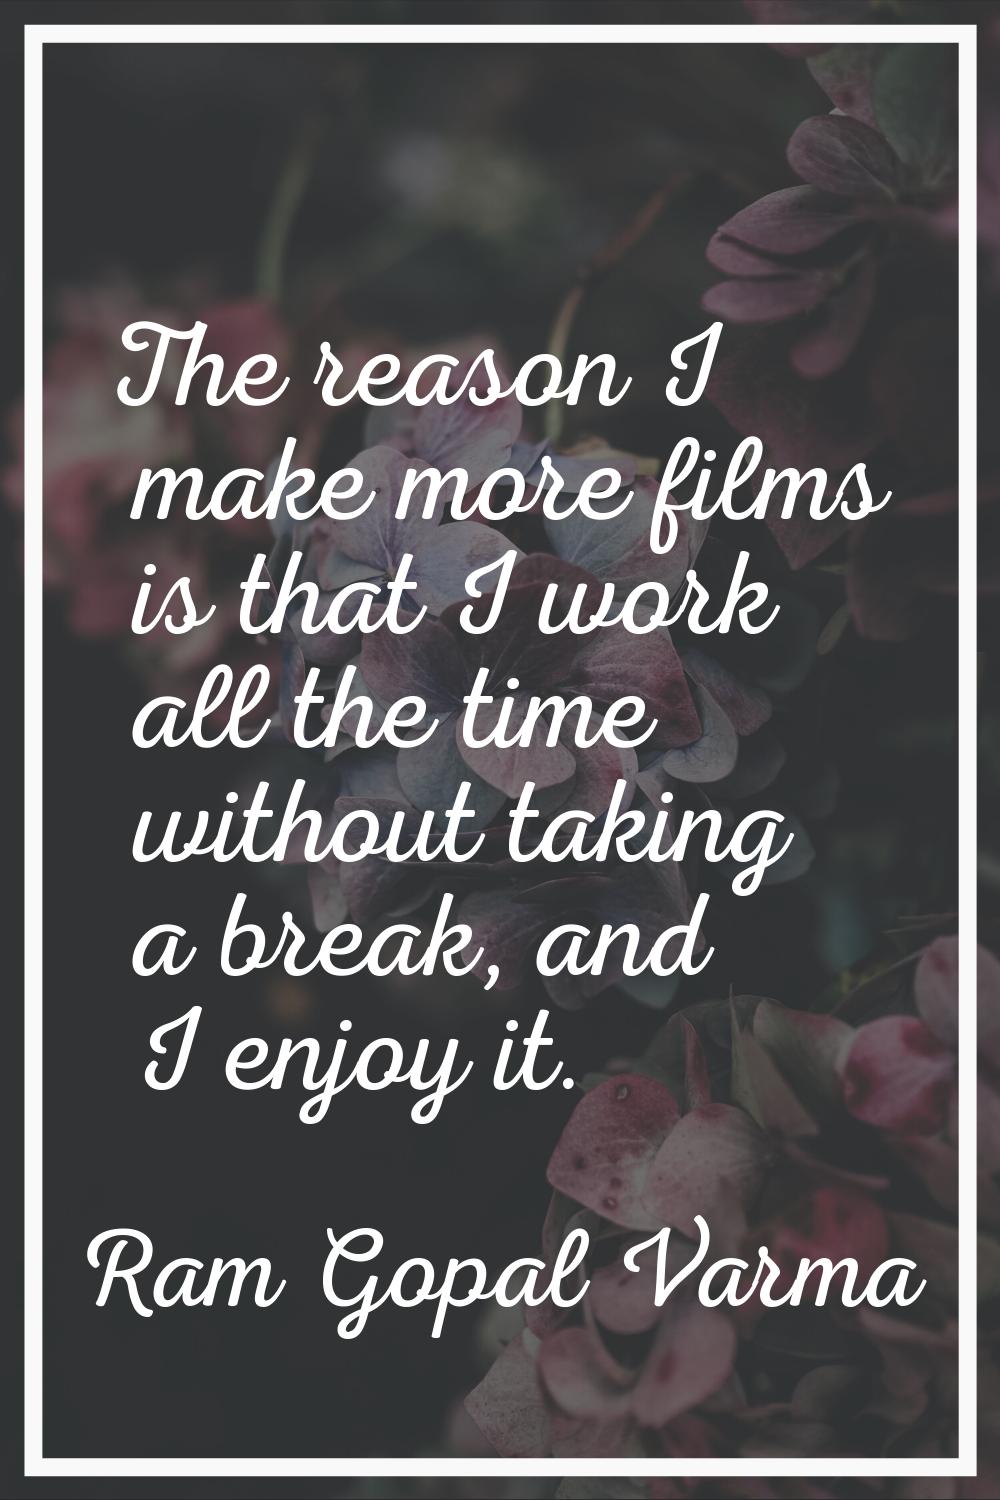 The reason I make more films is that I work all the time without taking a break, and I enjoy it.